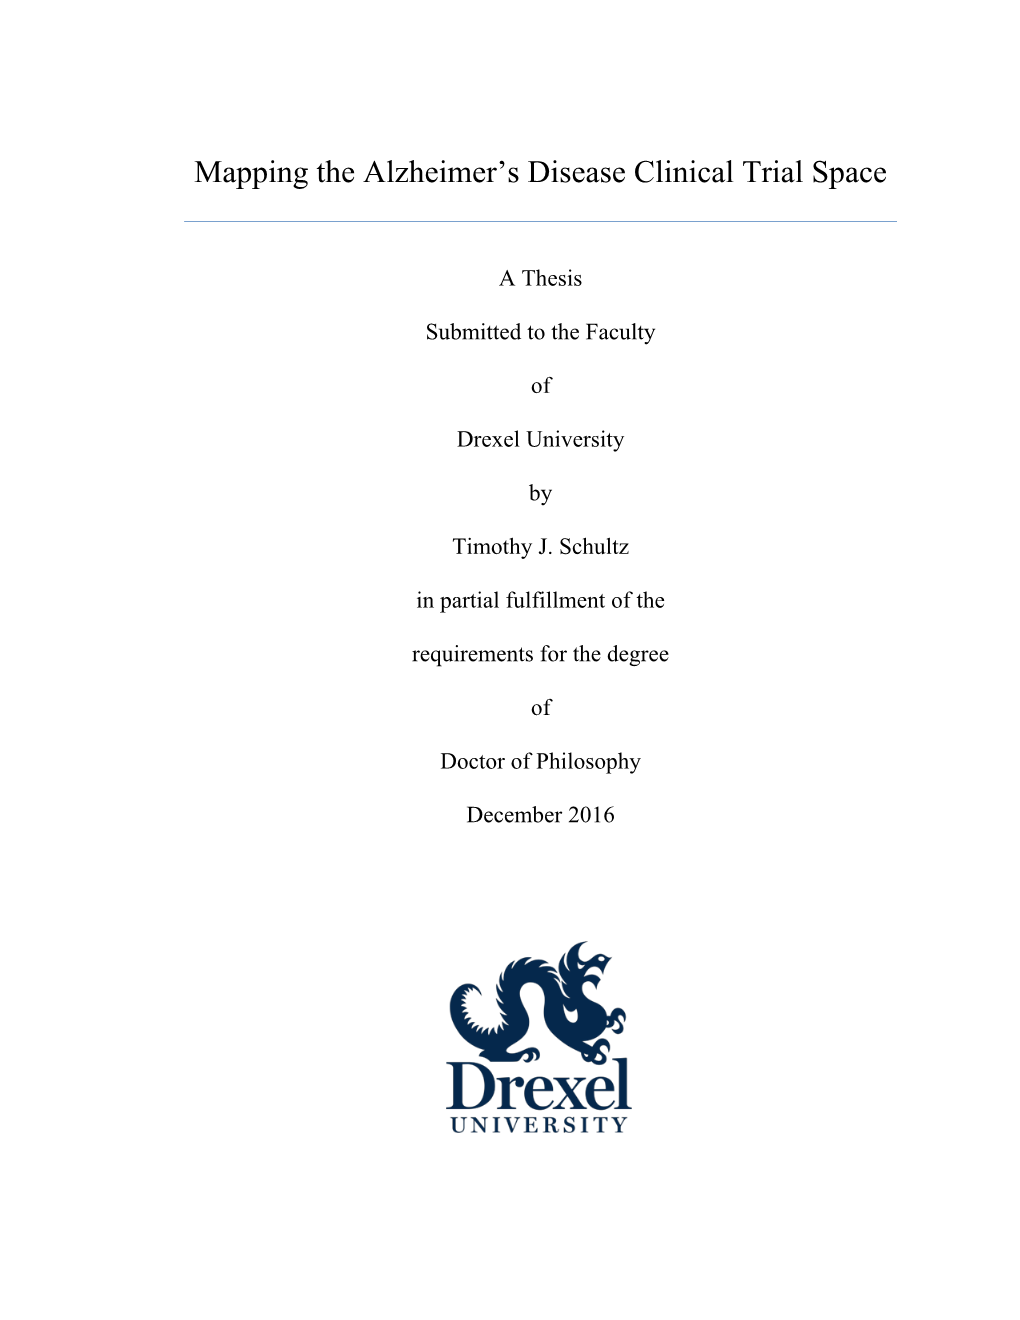 Mapping the Alzheimer's Disease Clinical Trial Space